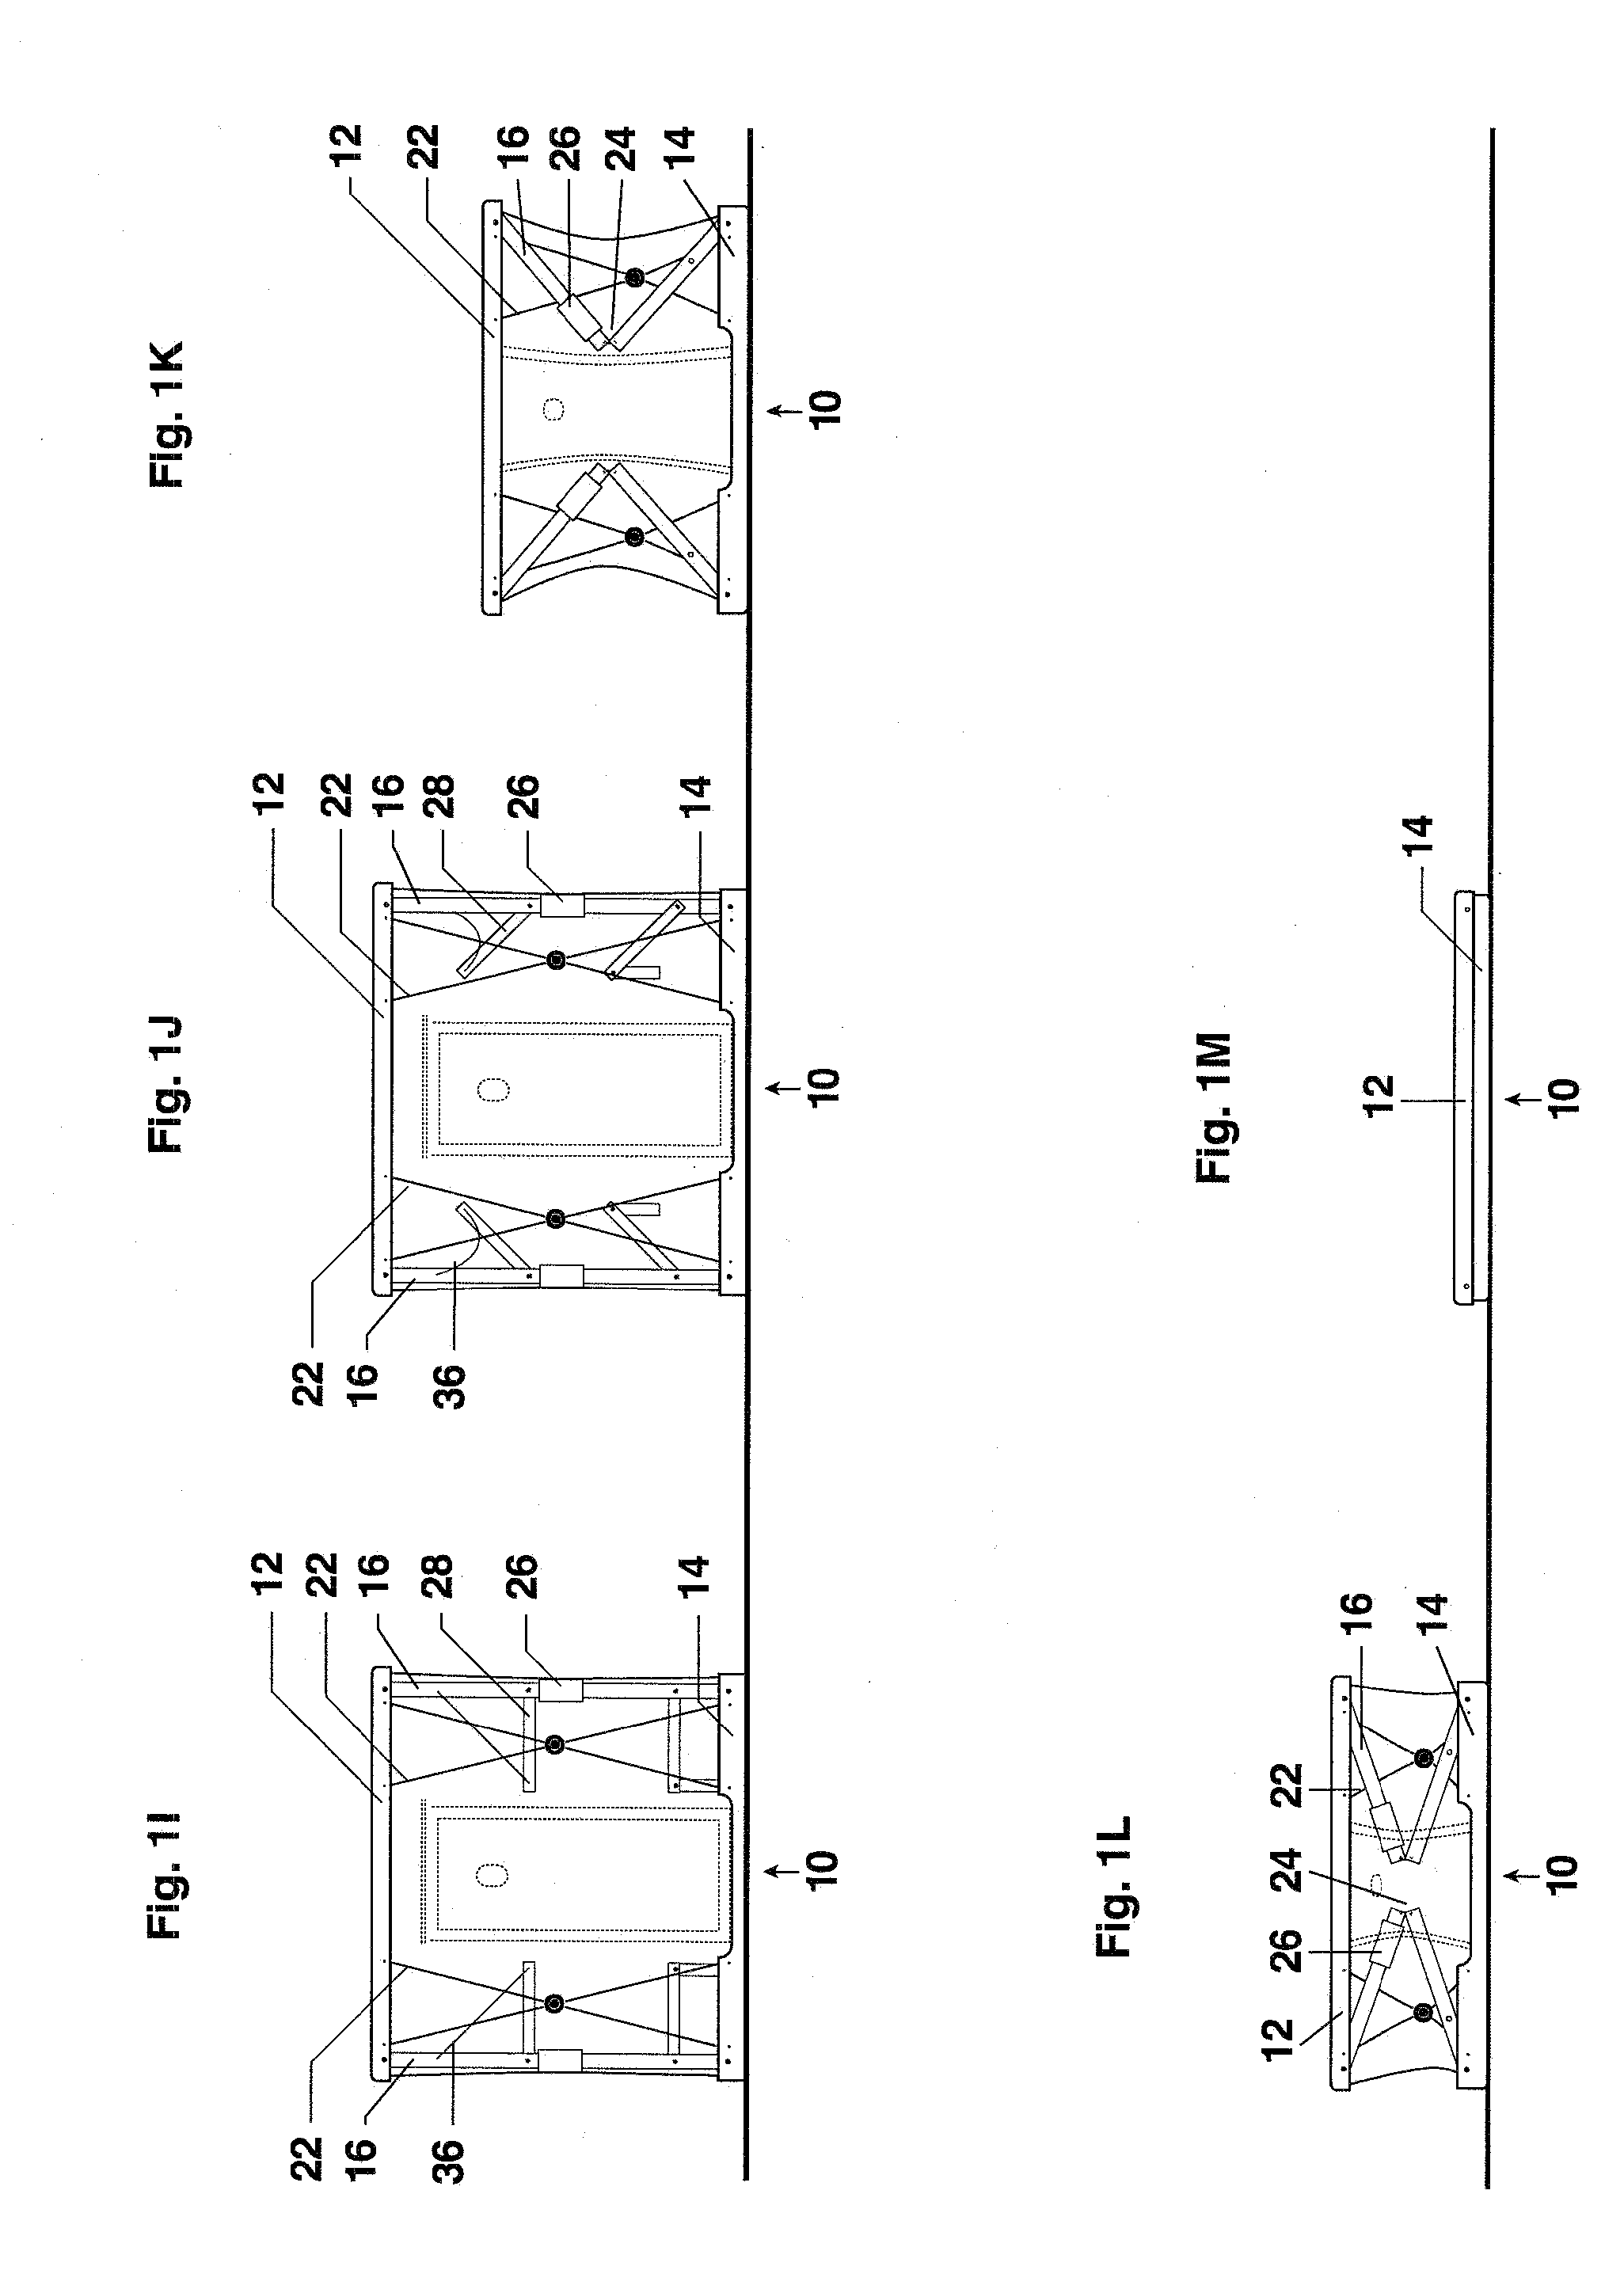 Portable Shelters, Related Shelter Systems, and Methods of Their Deployment